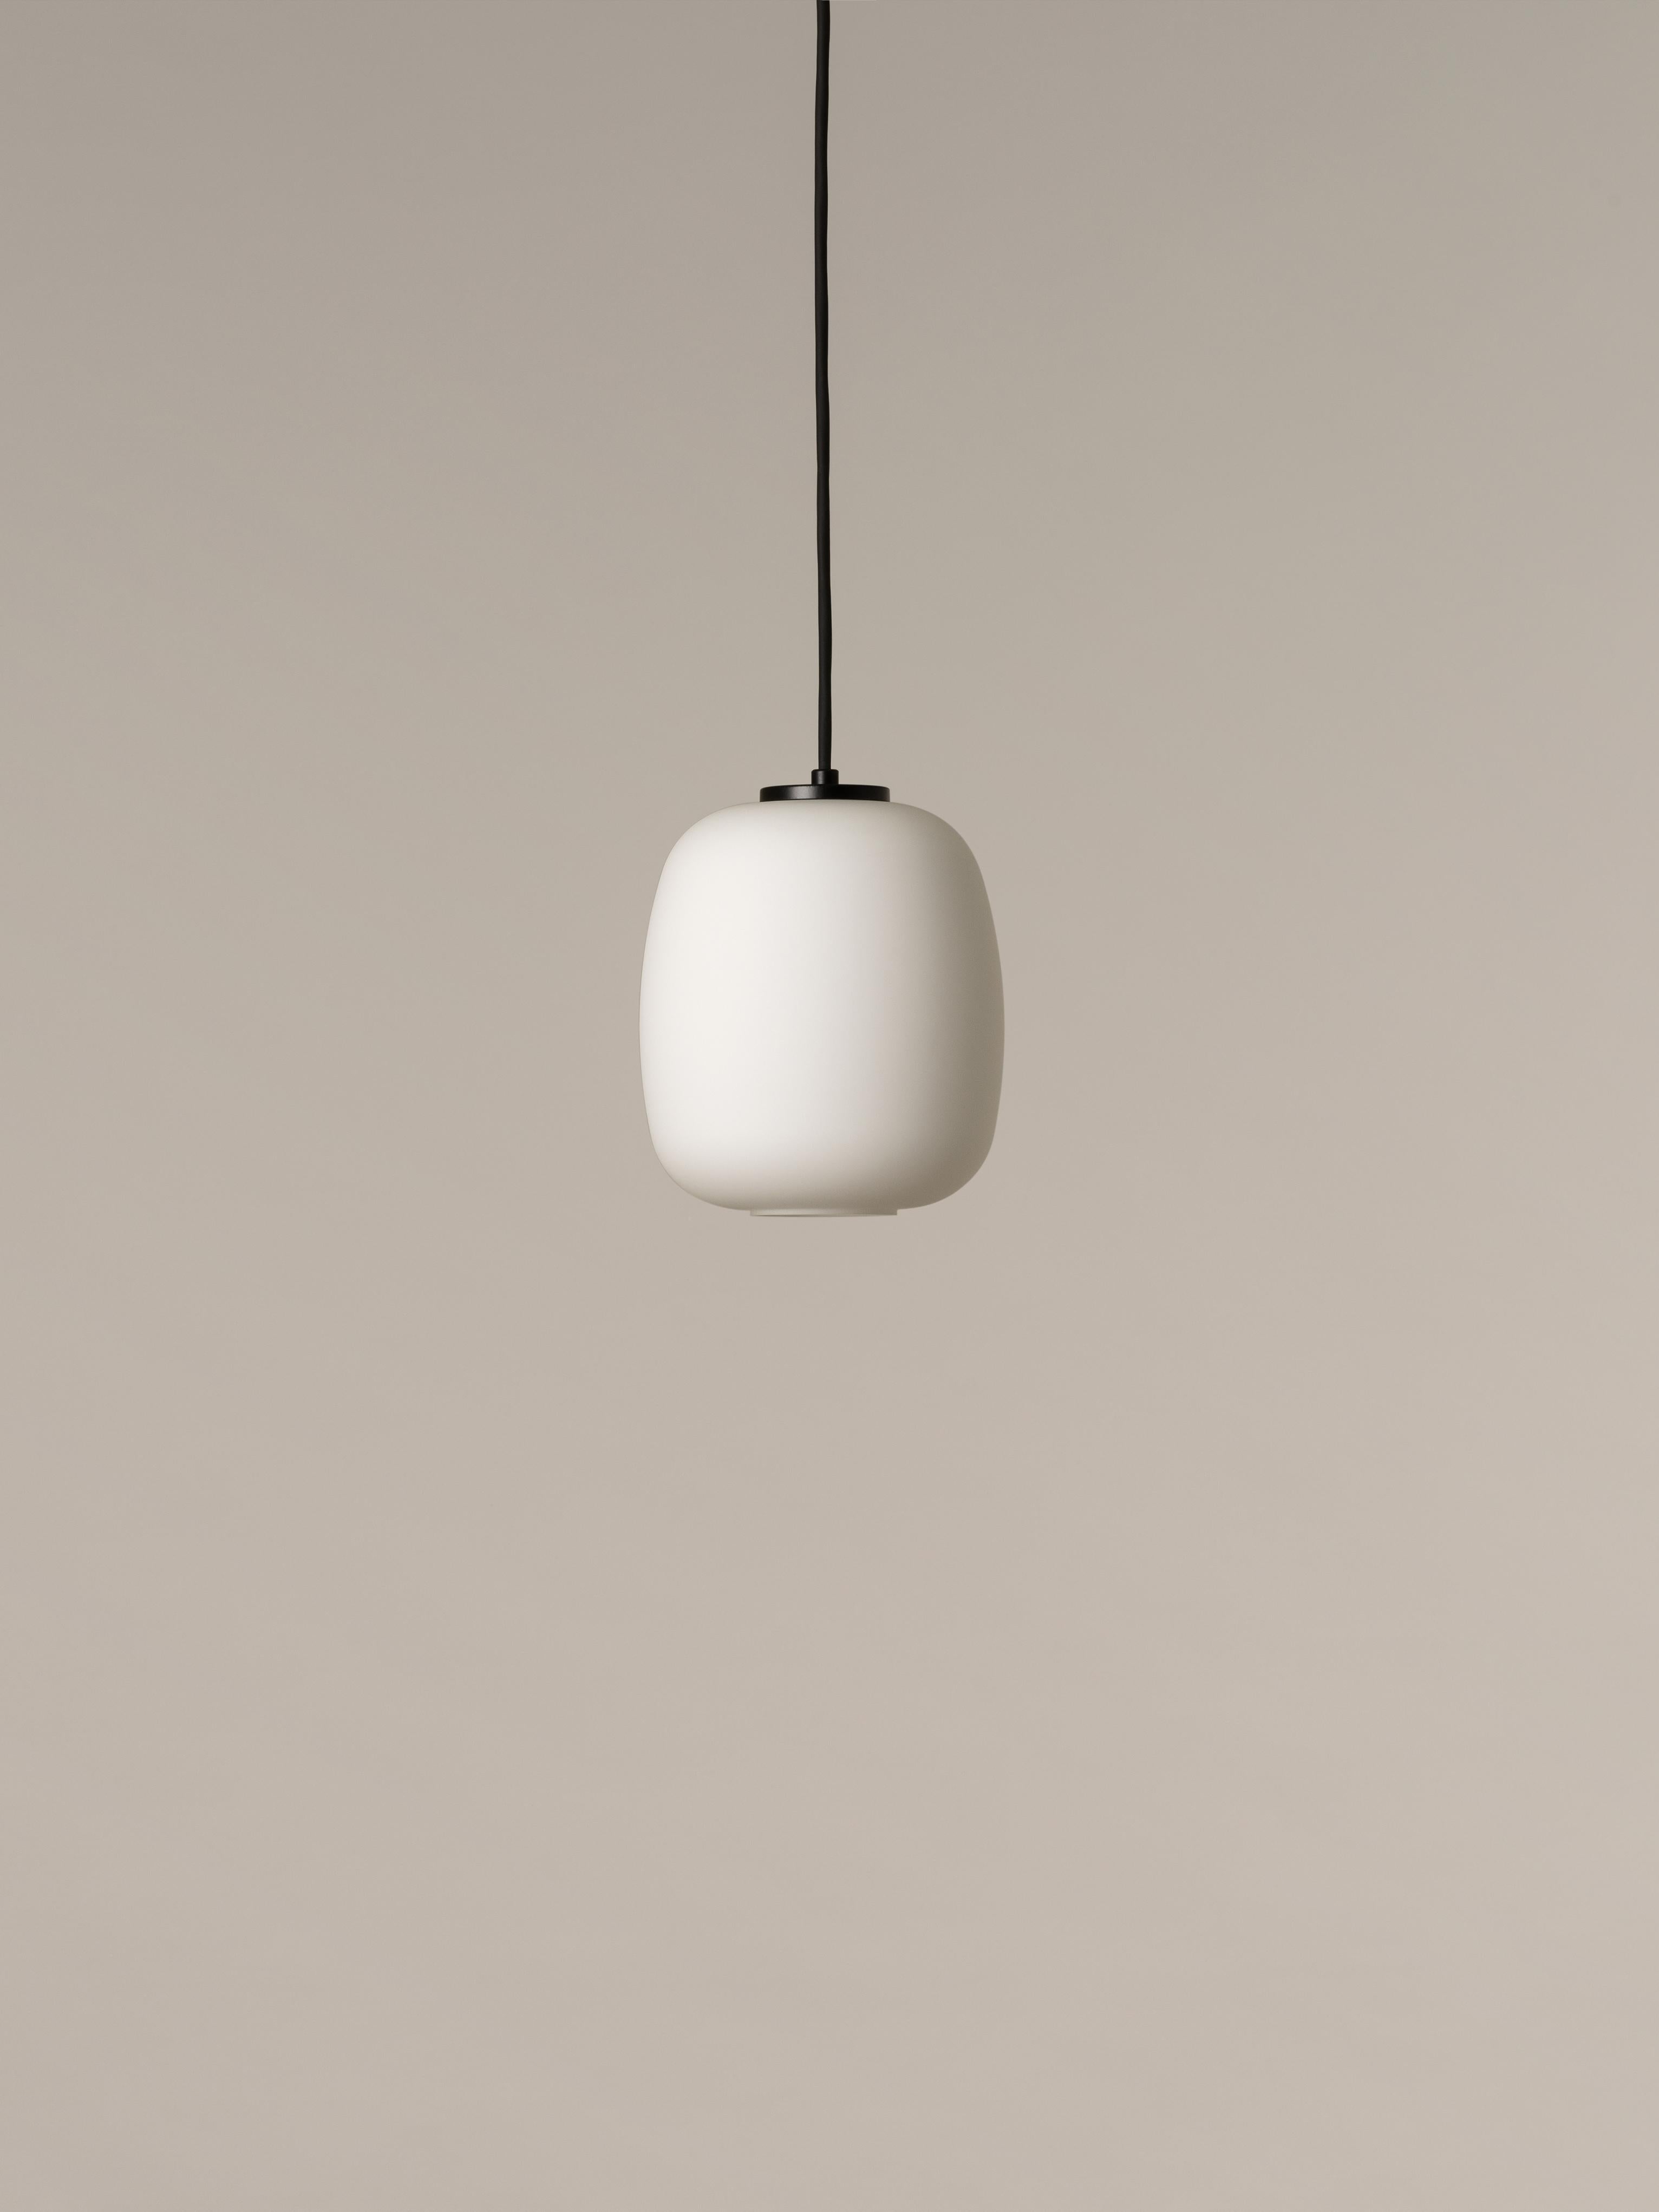 Globo Cestita pendant lamp by Miguel Milá
Dimensions: D 17 x H 21 cm
Materials: metal, glass.

Freed from its well-known wooden structure, the opal glass now shines on its own, attaining the elegance of a classic with an entirely contemporary